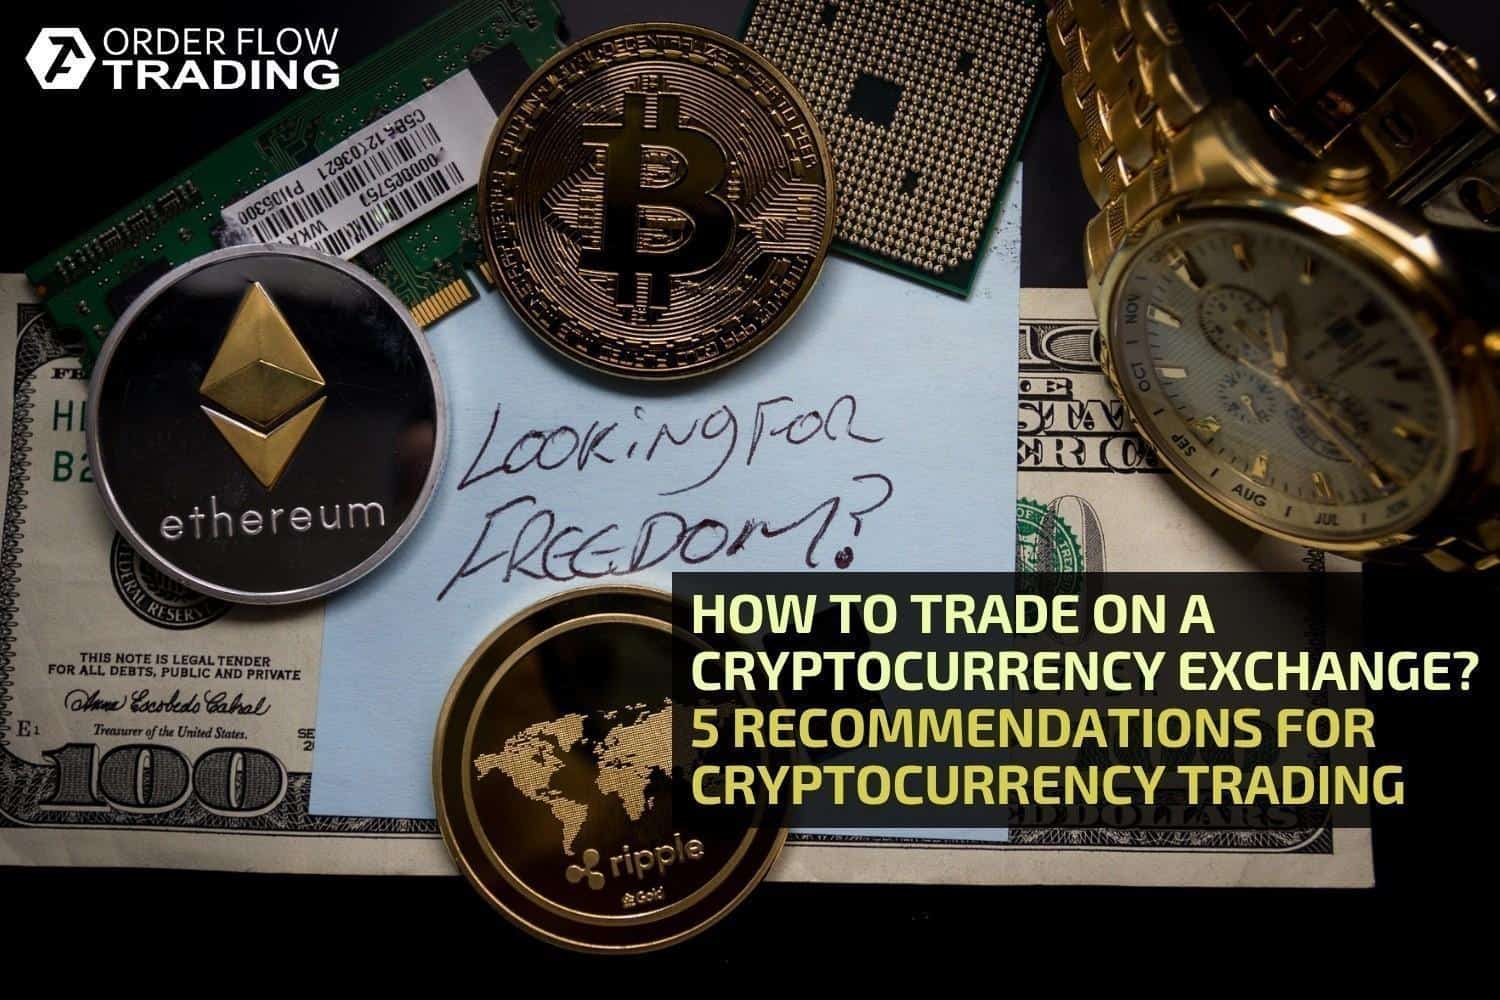 HOW TO TRADE ON A CRYPTOCURRENCY EXCHANGE